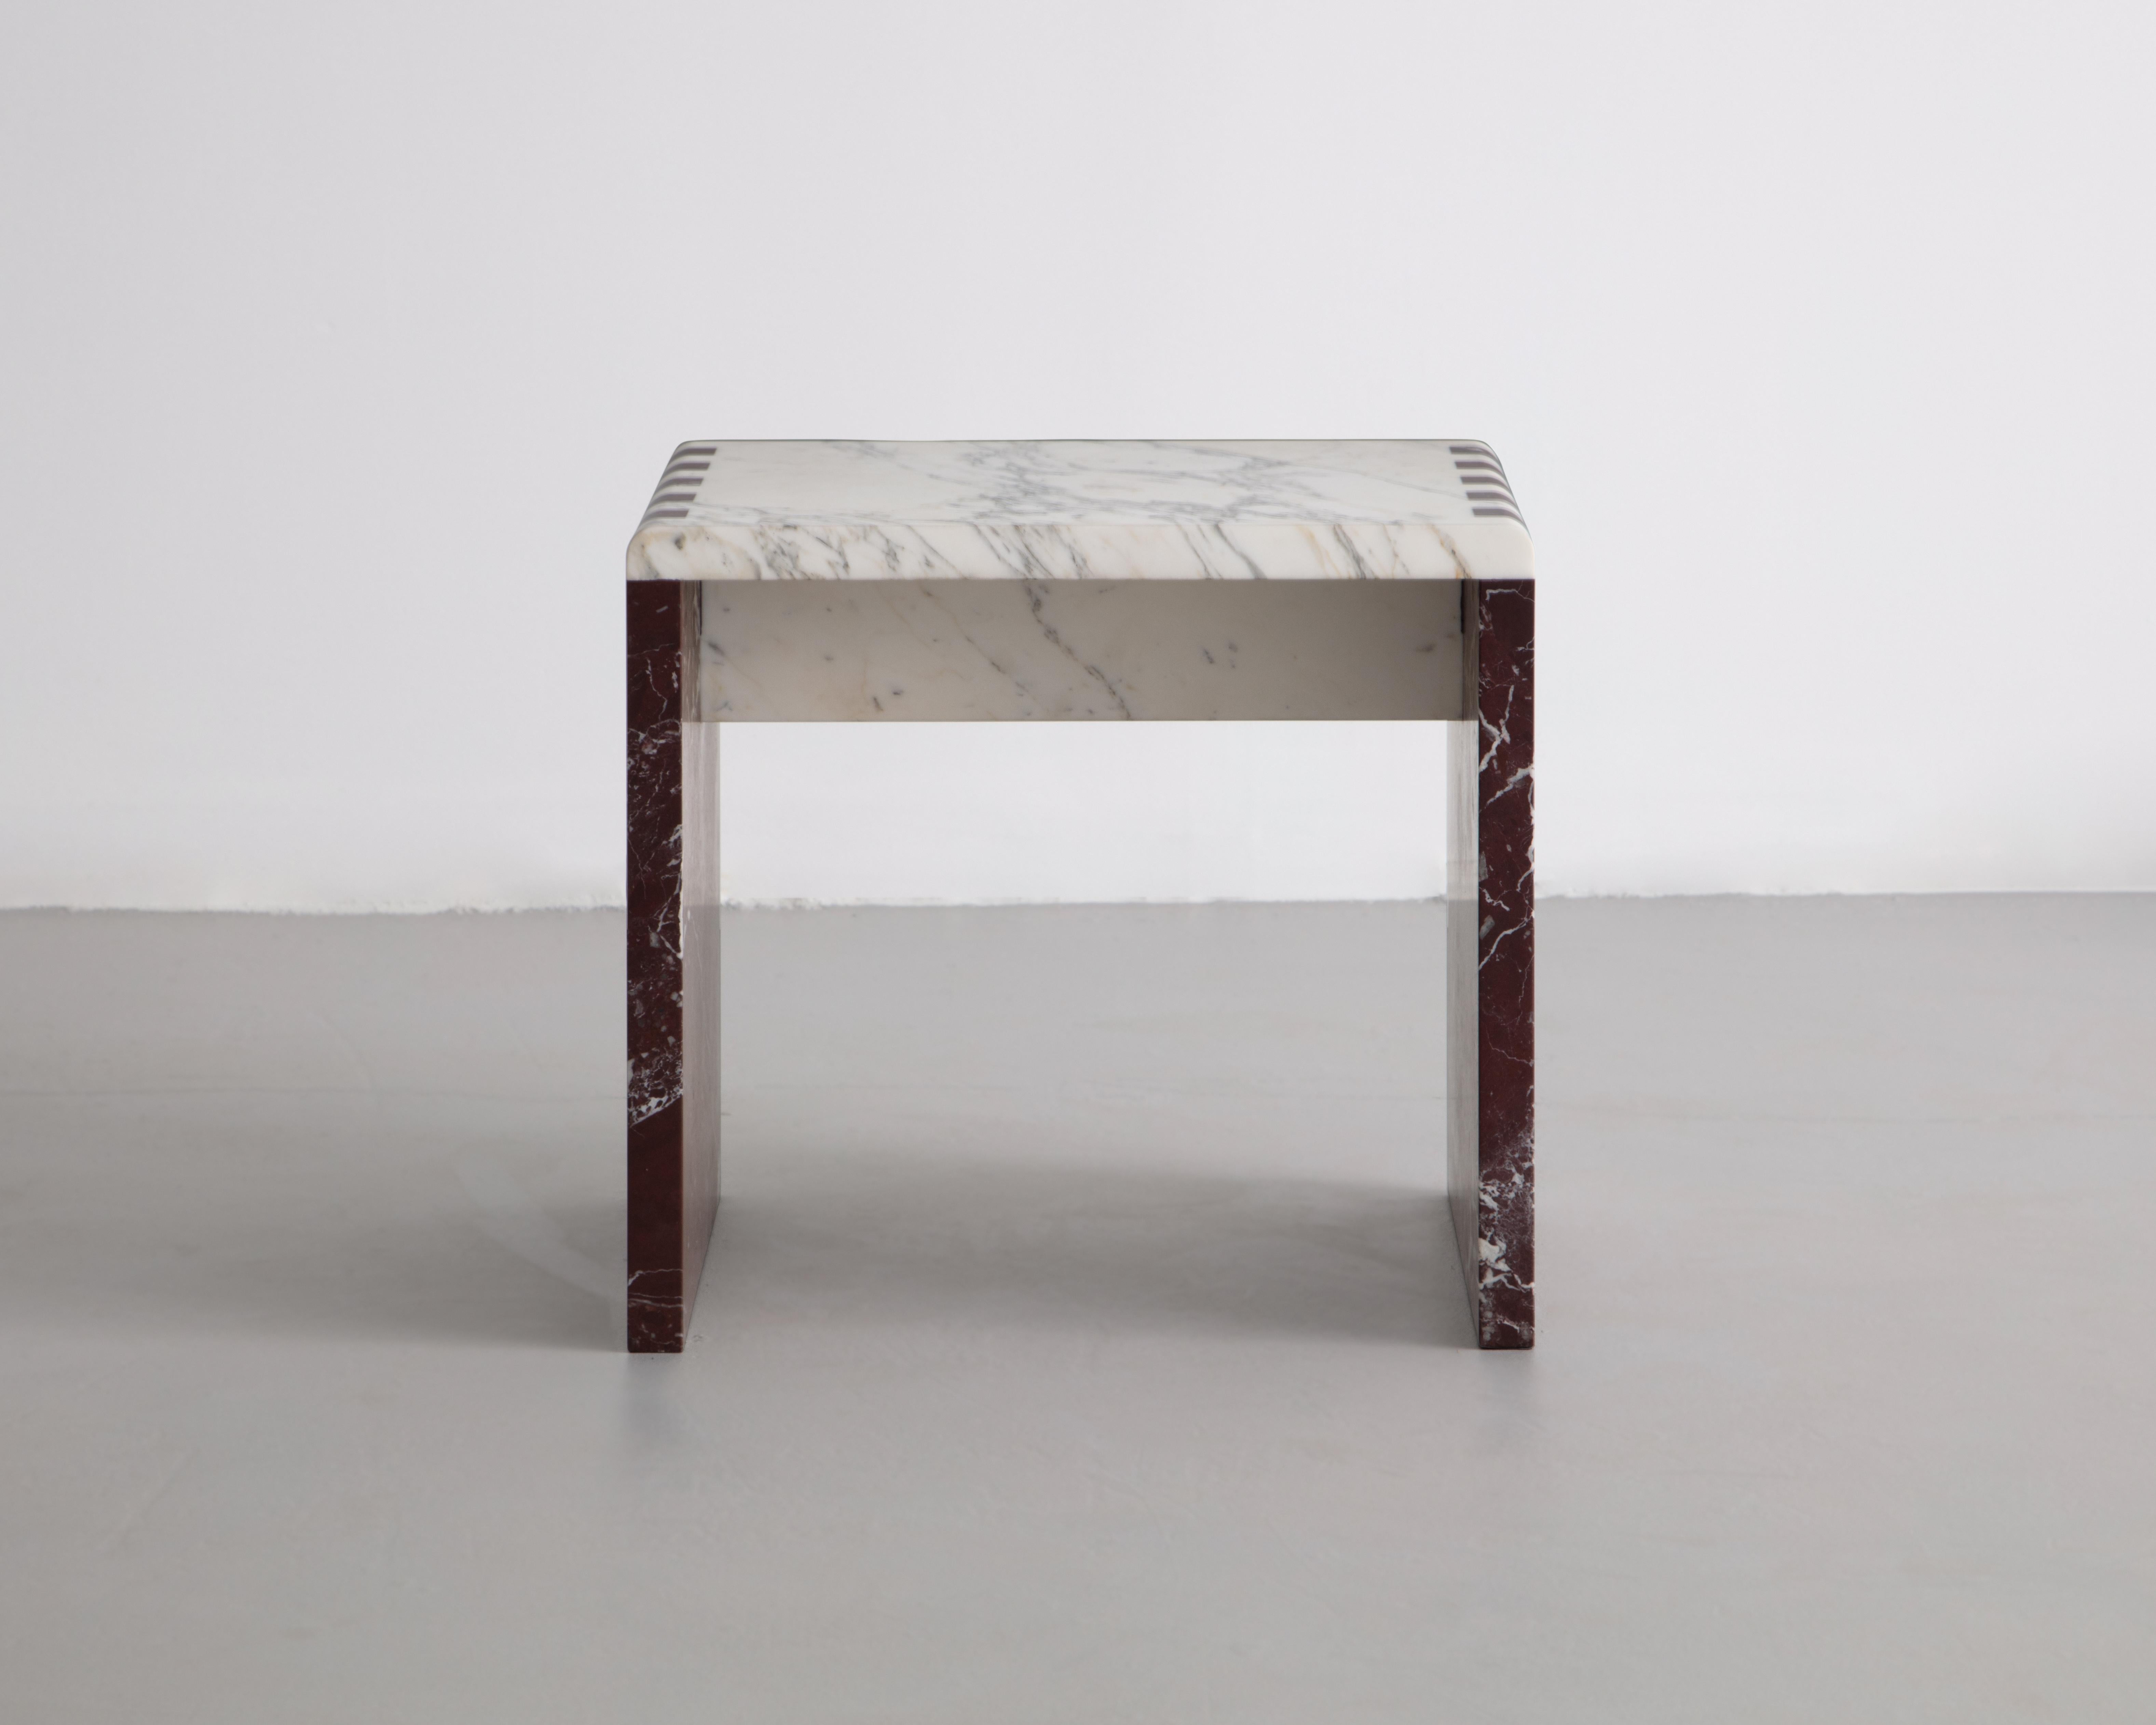 American Craftsman Japanese Jointed Marble Sculptural Stool / Side Table For Sale